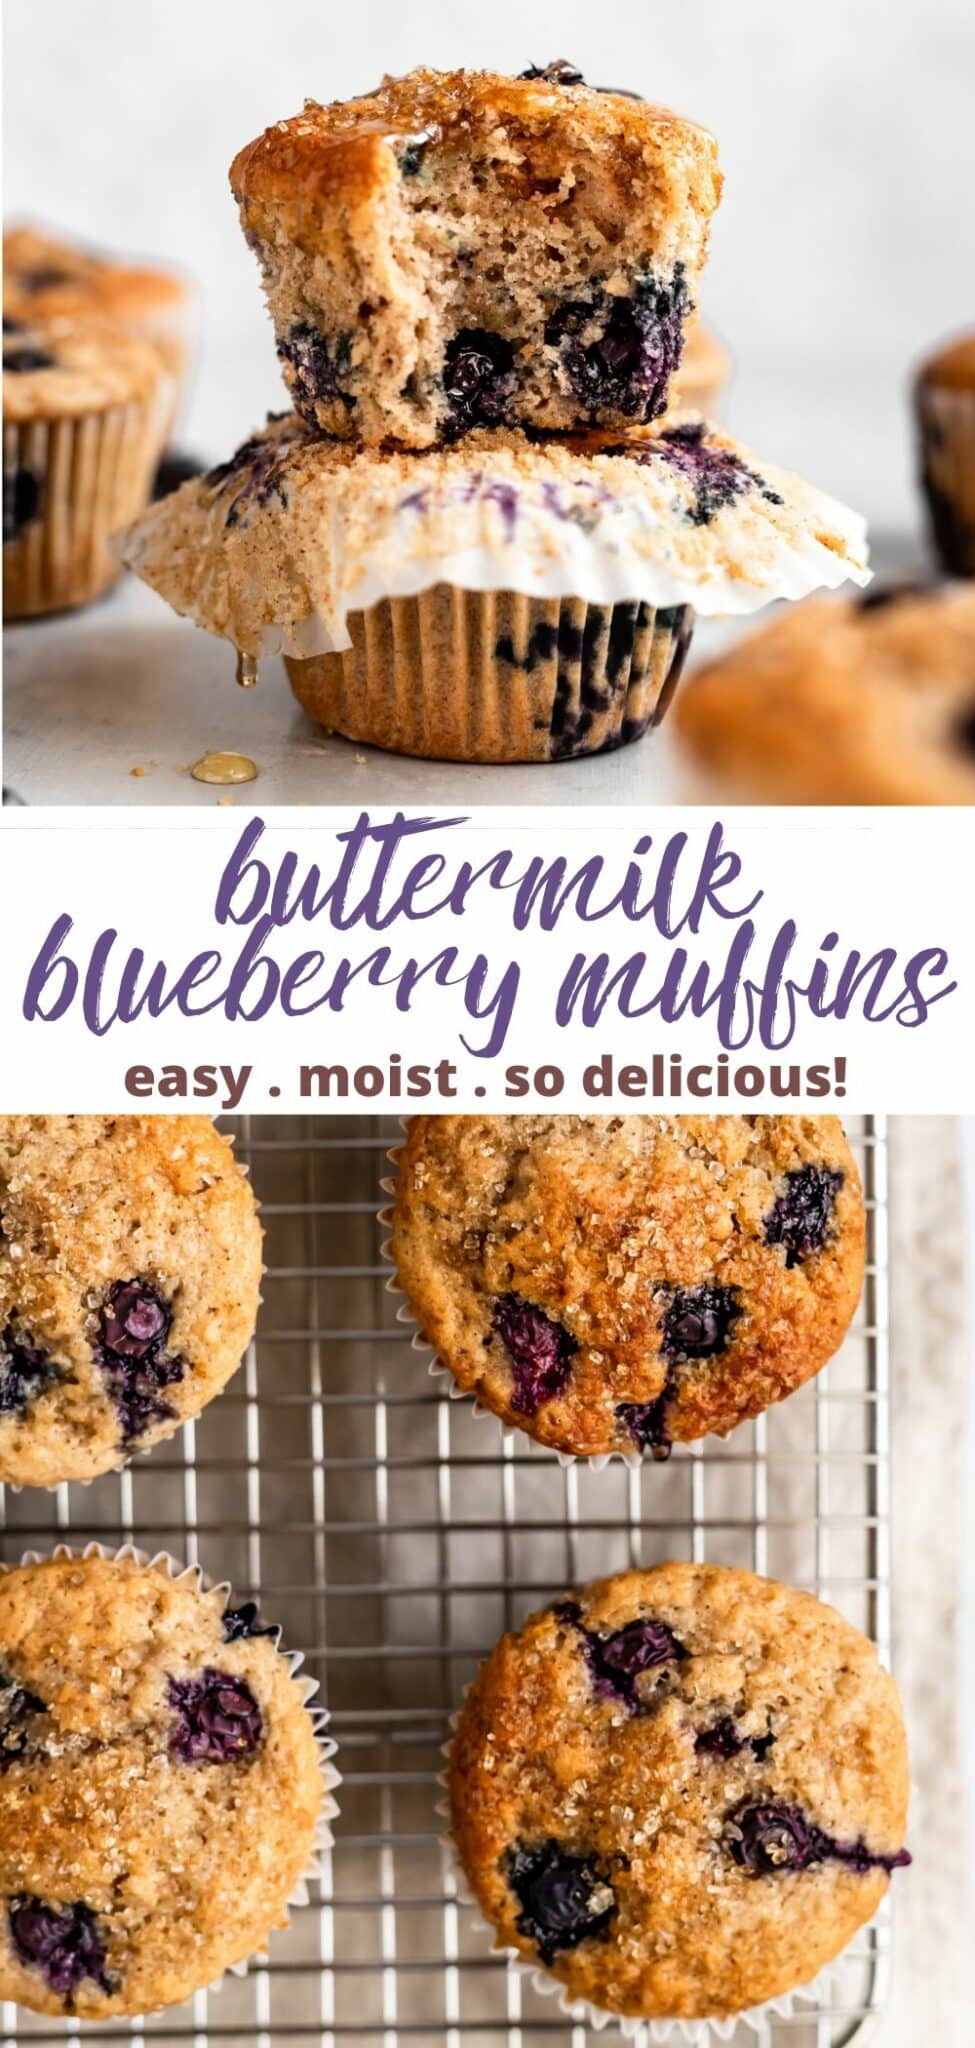 Buttermilk Blueberry Muffins - Kim's Cravings